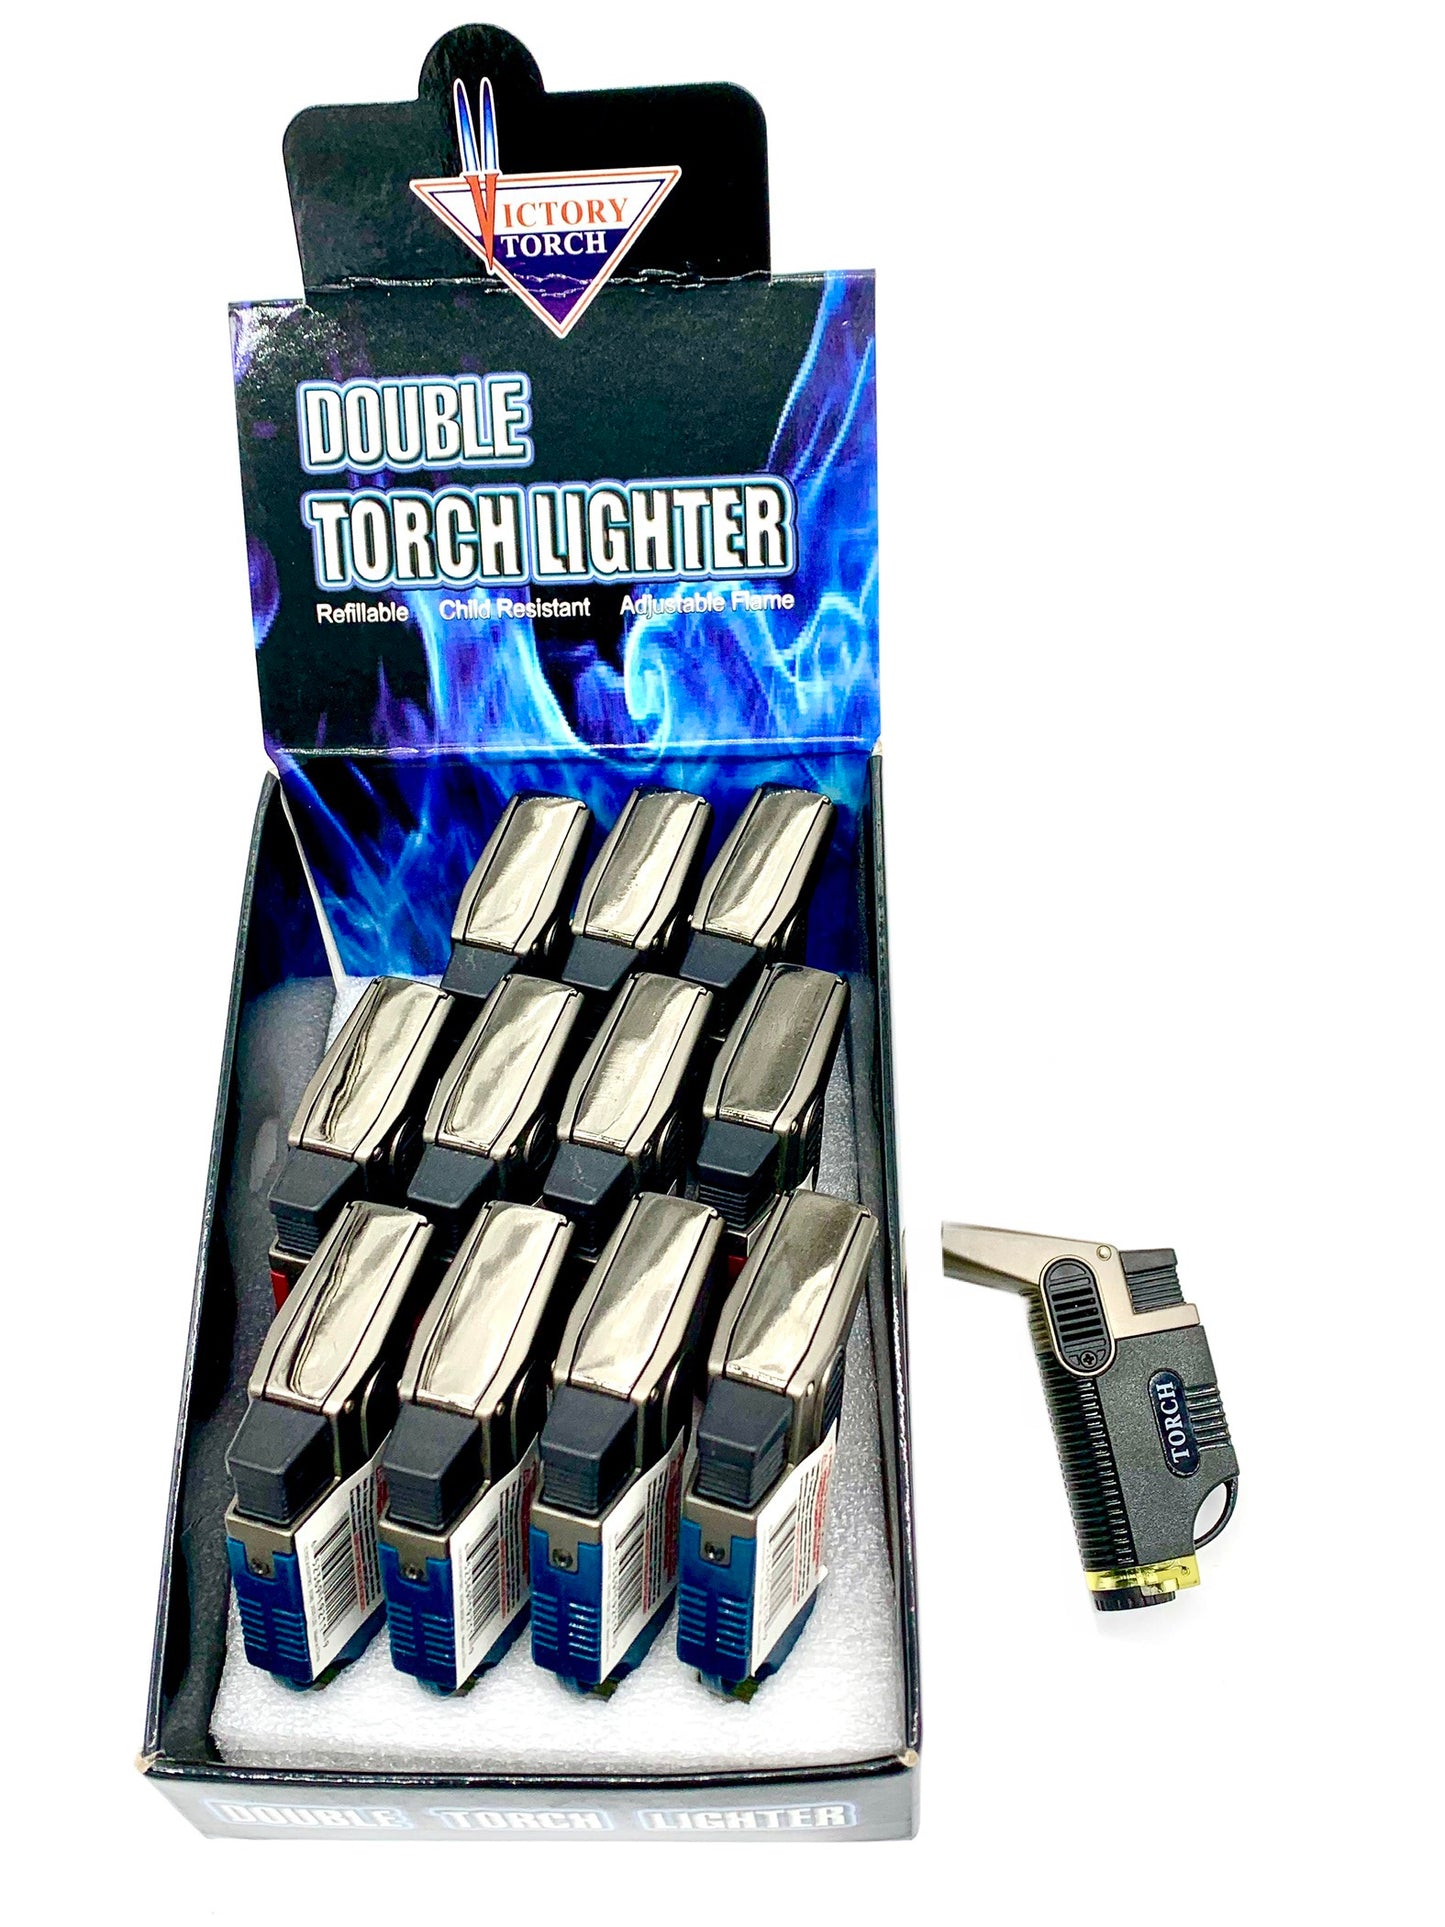 (24ct) Victory Torch Heavy Duty Double Torch Angle Lighter $1.75 EA